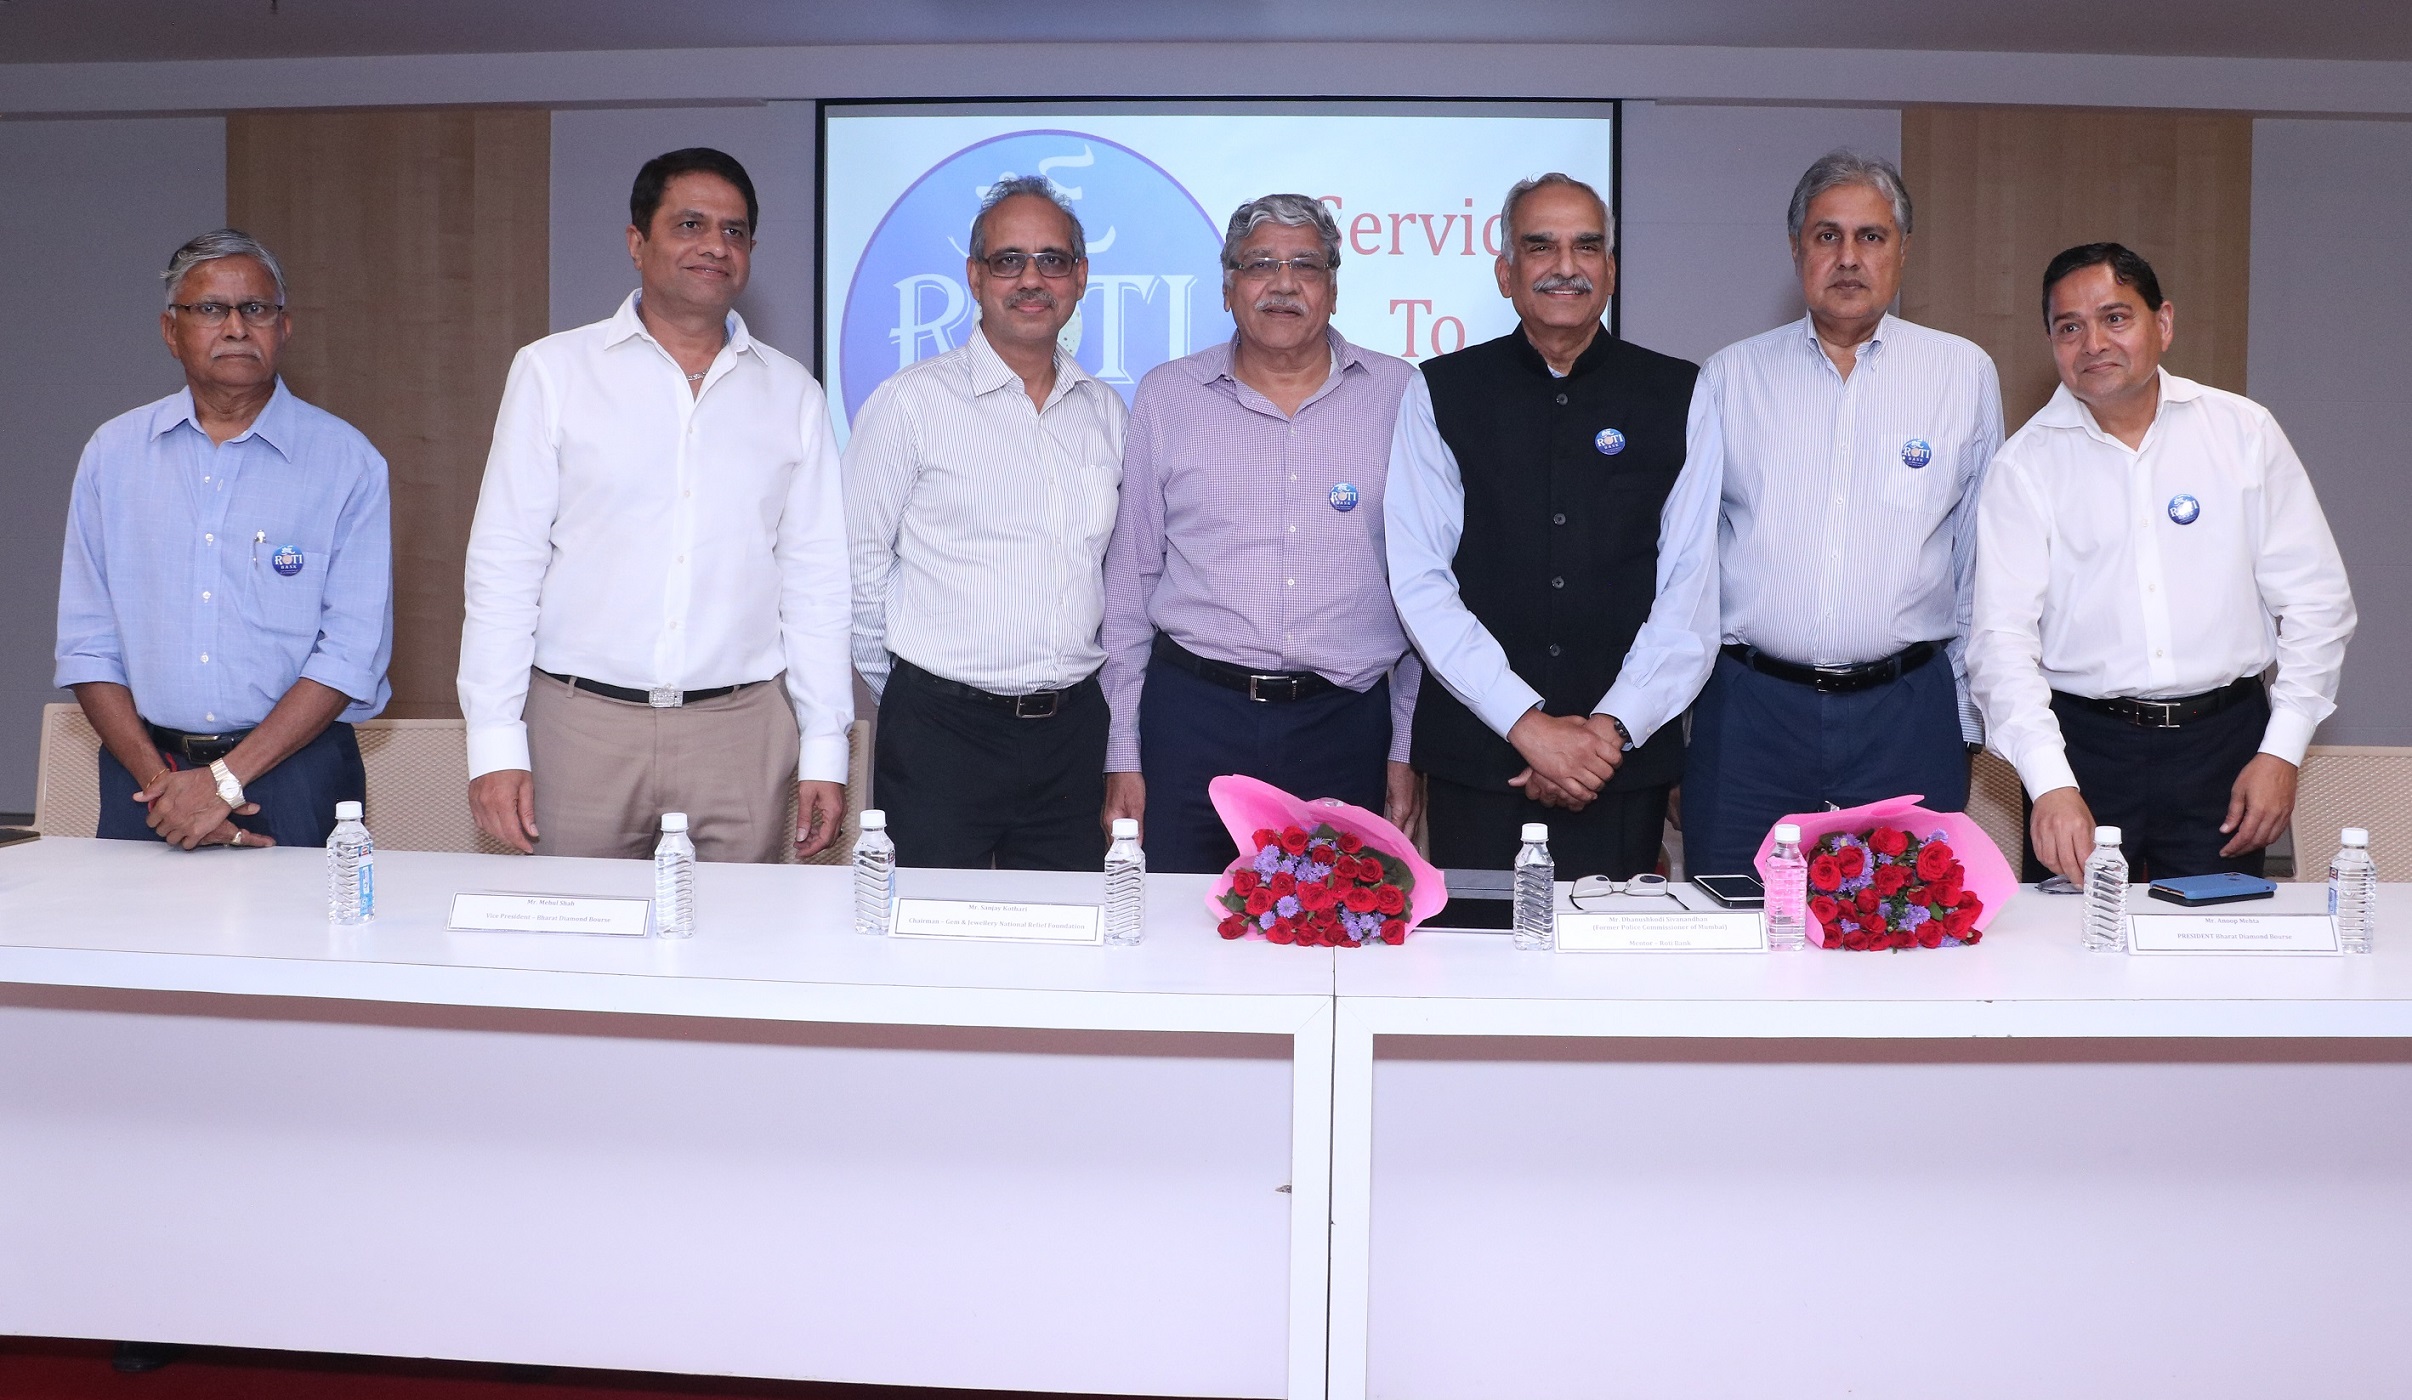 Mr Anoop Mehta, President, Bharat Diamond Bourse, Mr Sanjay Kothari, Chairman, Gems and Jewellery National Relief Foundation (GJNRF), Mr Kirit Bhansali, Member BDB and GJNRF along with other dignitaries at a function held at the Bharat Diamond Bourse (BDB) in Mumbai to donate 2 vans to the Roti Bank, a non-profit organisation which thrives to make the city free of hunger and excess food to be delivered to the needy people. On this occasion Shri. D Sivanandhan, Mentor Roti Bank and former Commissioner of Police, Mumbai was felicitated by the dignitaries -Photo By GPN